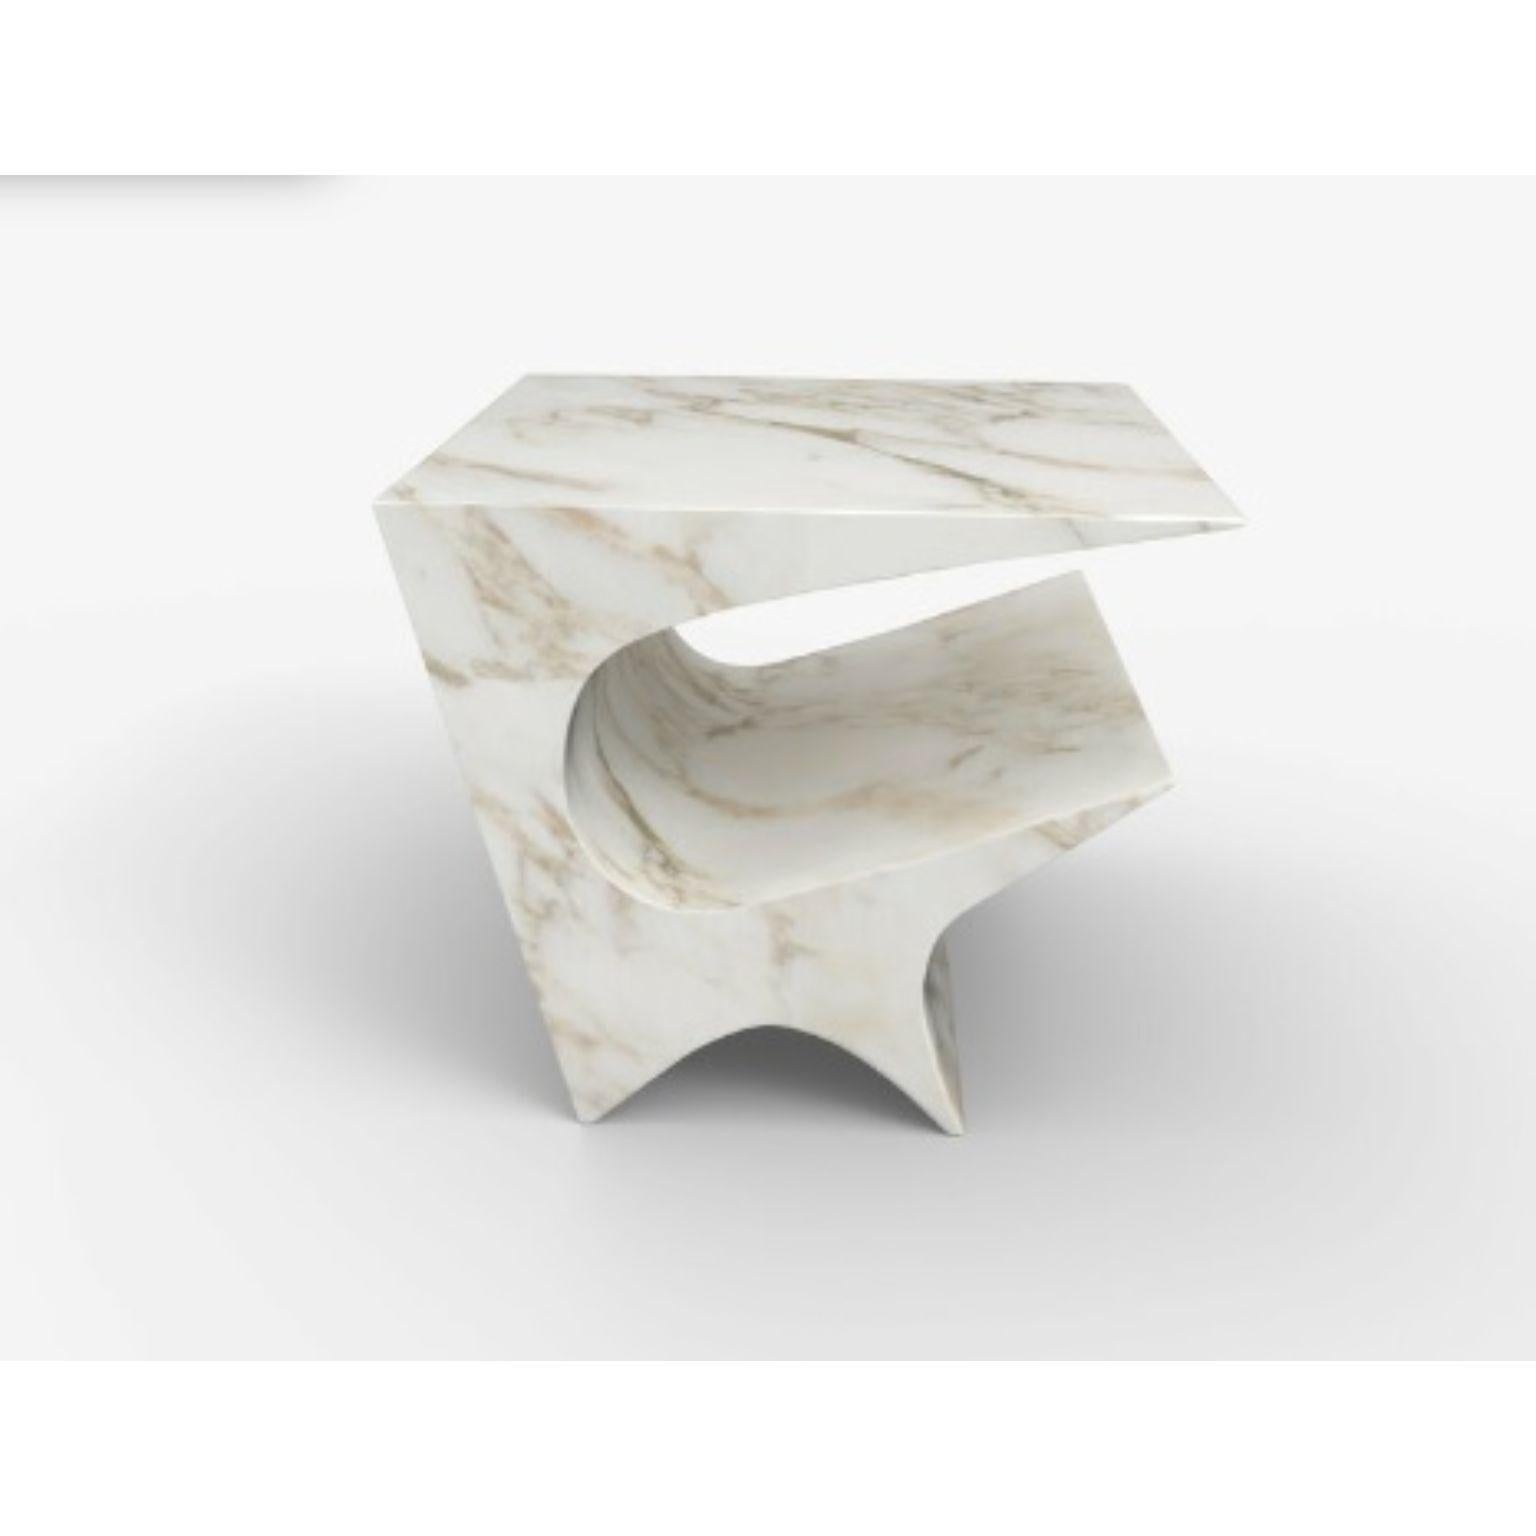 Star axis side table in marble by Neal Aronowitz Design
Dimensions: D 61 x W 55.9 x H 50.8 cm
Materials: Marble.
Custom sizes and colors are available. 

This modern, minimalist side table by award-winning artist/designer Neal Aronowitz is a